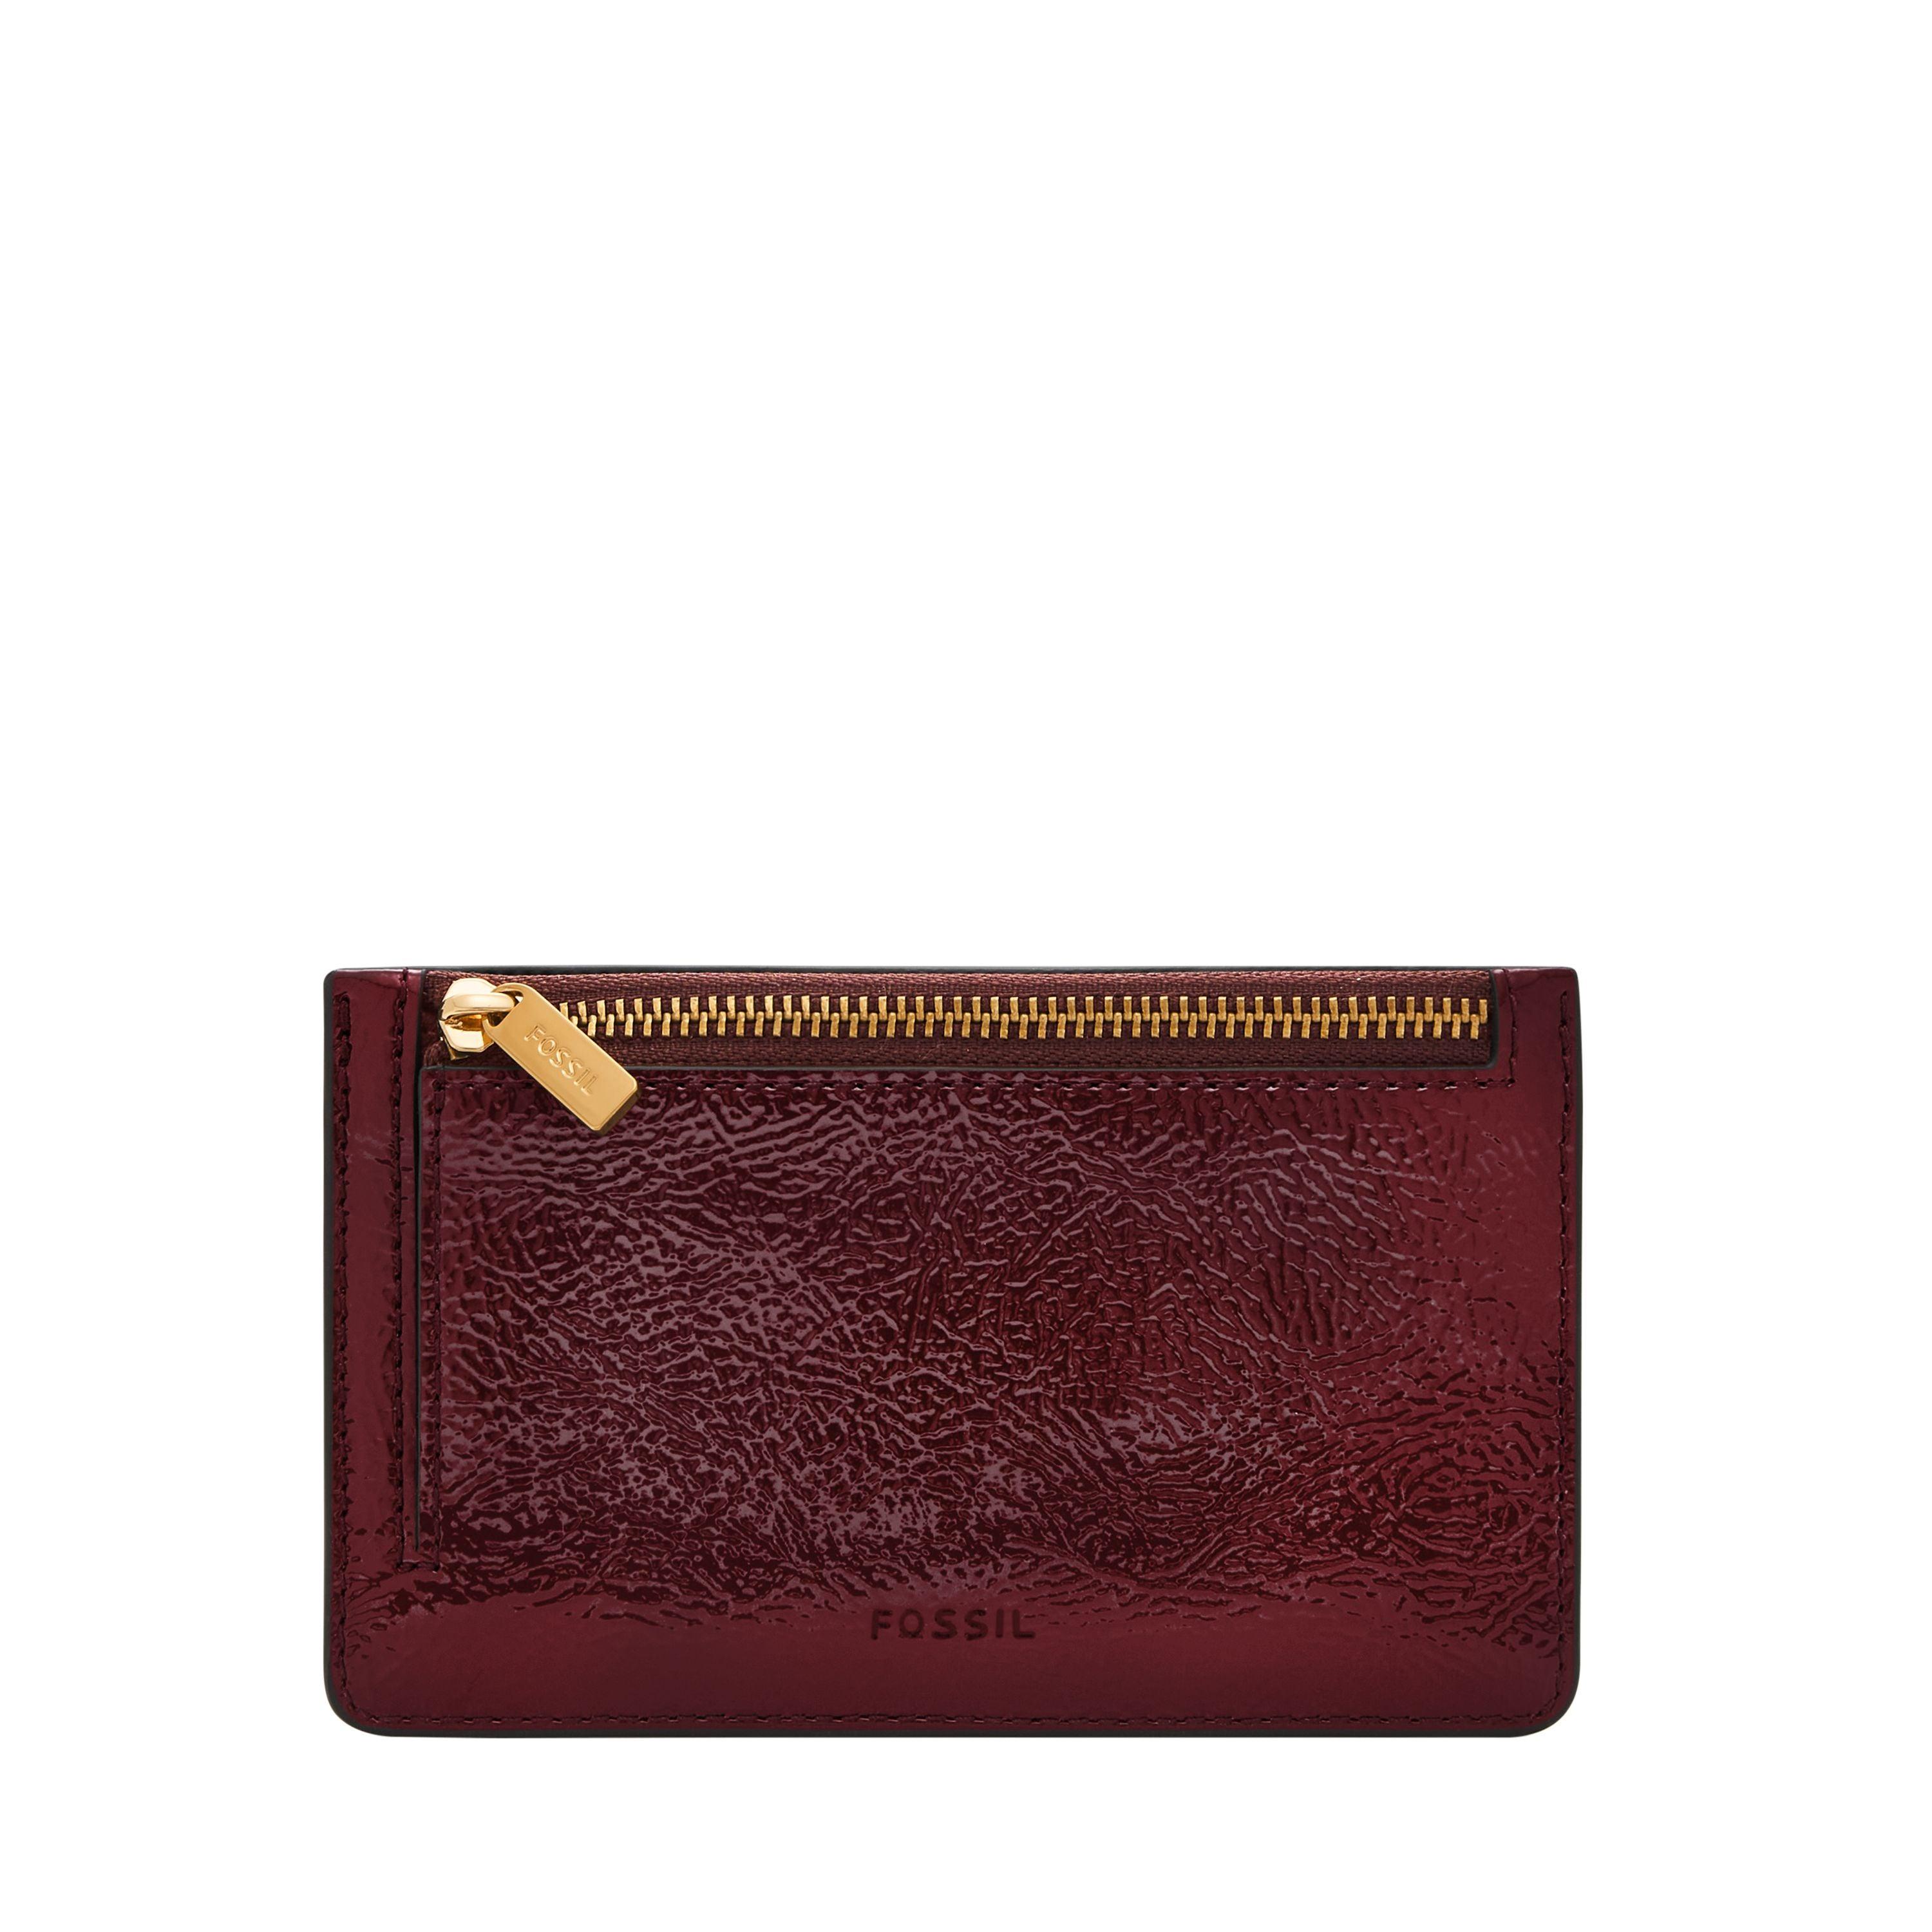 Fossil Small Red Leather Crossbody Bag | Brown leather shoulder bag,  Crossbody bag, Purses crossbody